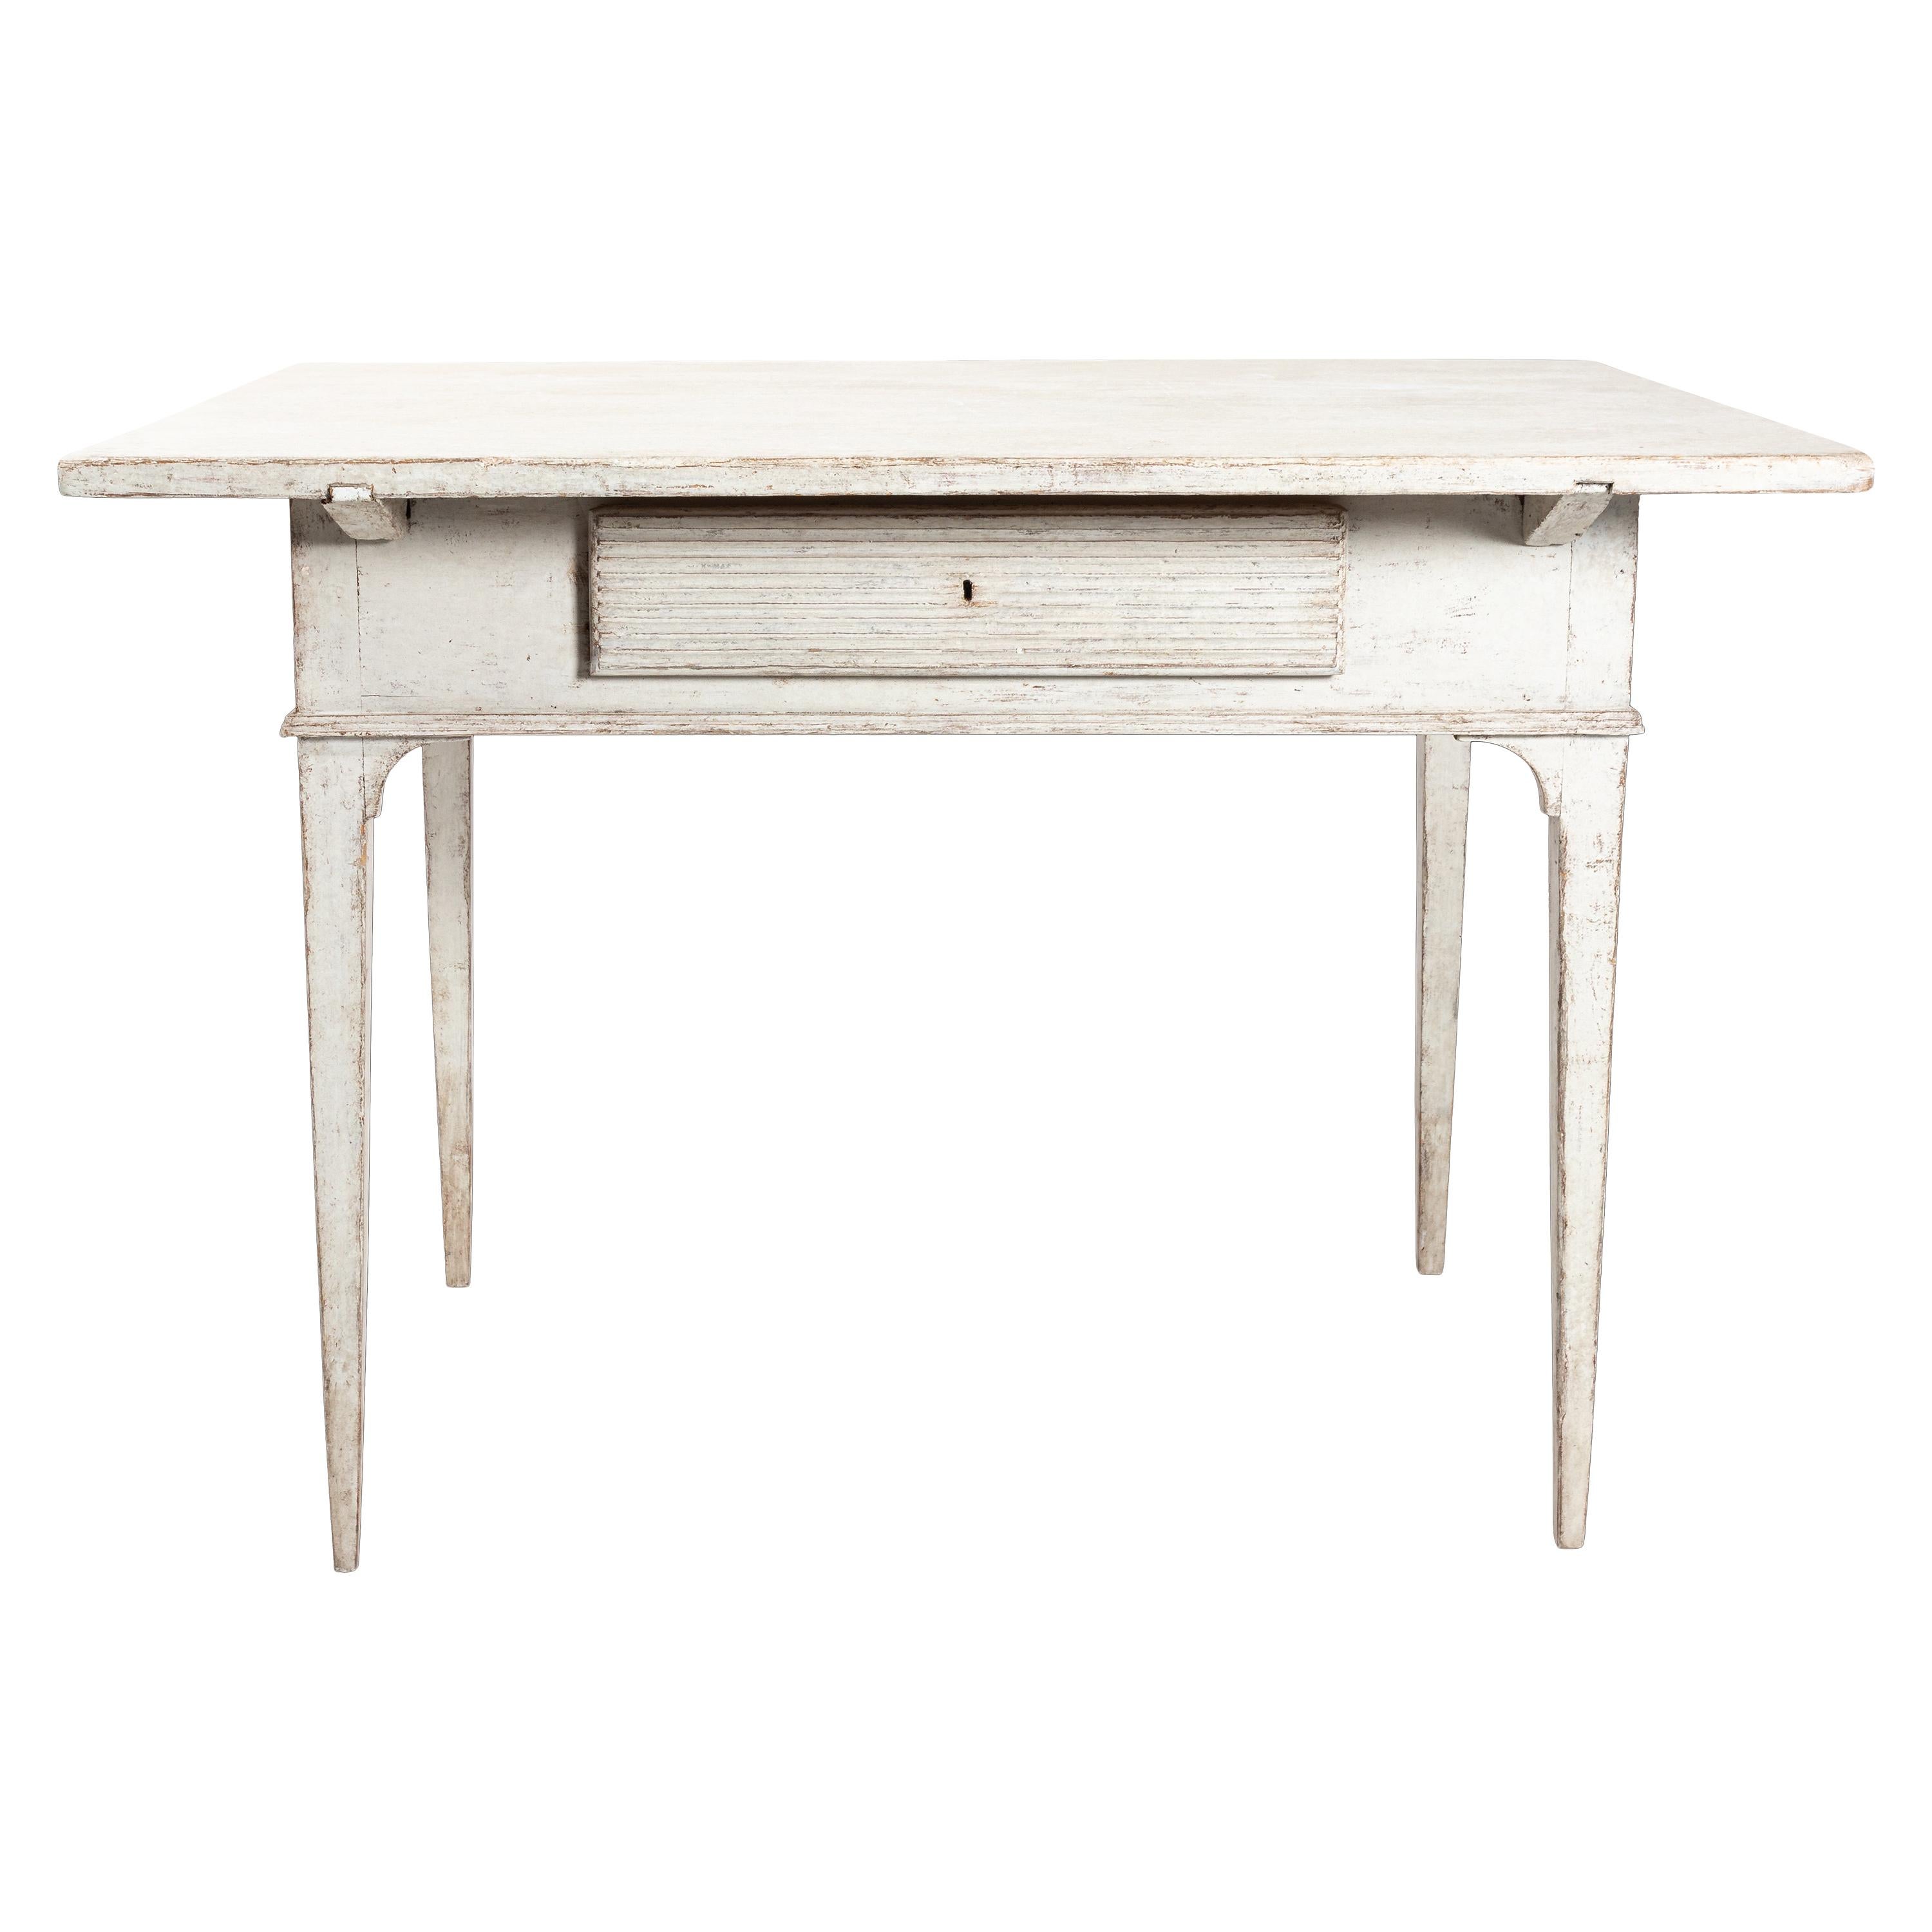 19th Century Gustavian Lamp Table with a Single Drawer